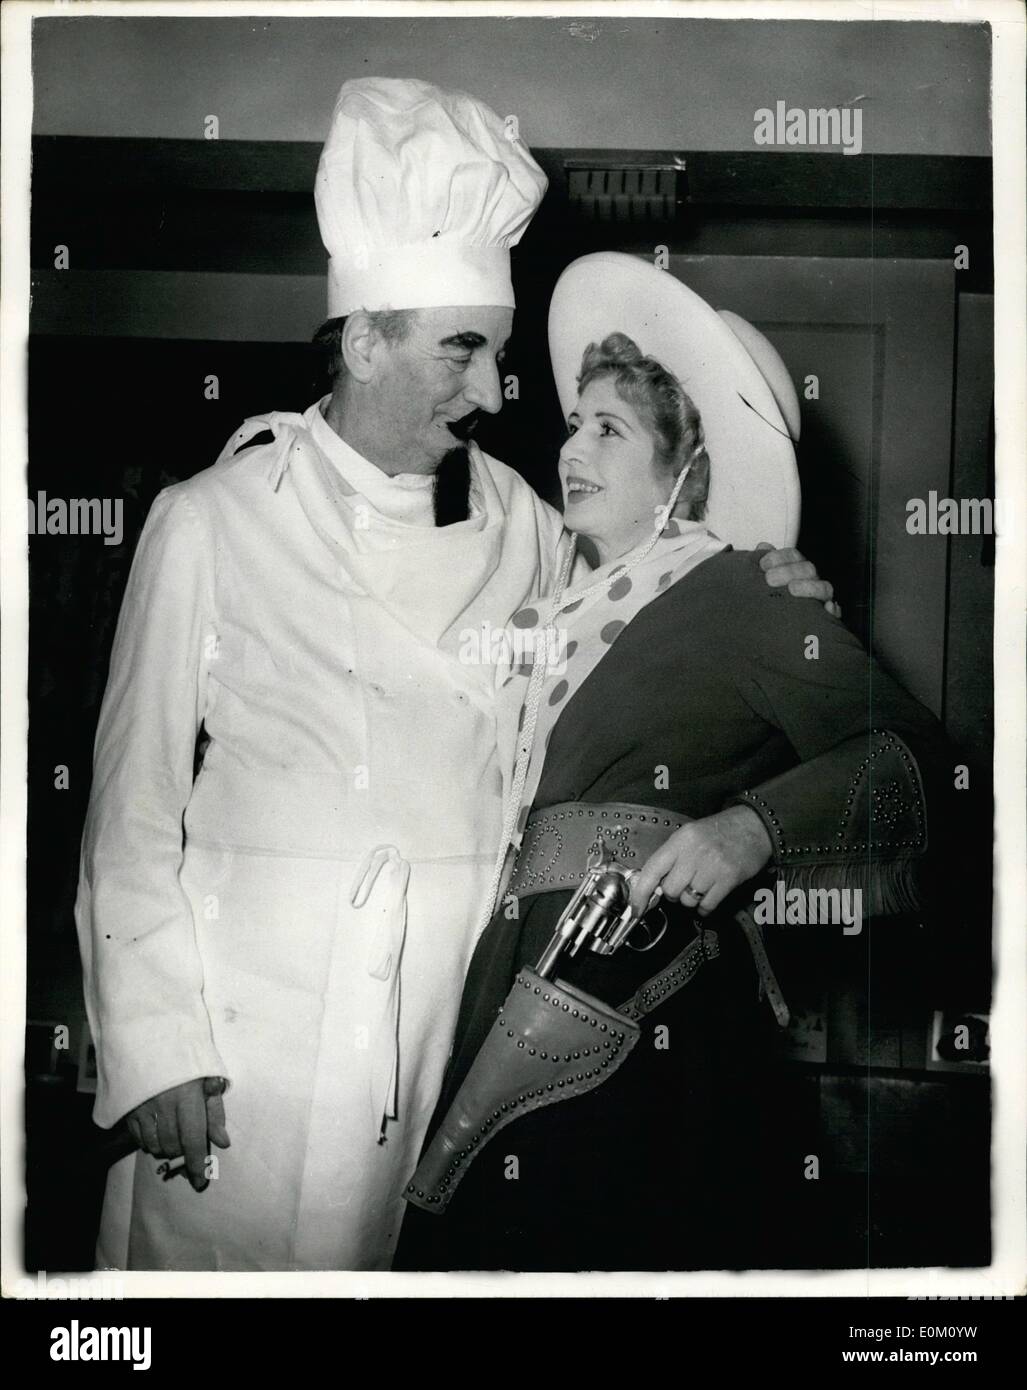 Jan. 01, 1953 - 1.1.53 Sir Bernard and Lady Docker in fancy dress. Photo Shows: Two ideas for the kind of fancy dress with which to welcome the New Year. A chef's costume of gleaming white overalls and tall hat, moustache and beard, and a Western outfit complete with cap-firing gun. The wearers, at Poole Harbour Yacht Club's ball last night were Sir Bernard and Lady Docker. Stock Photo